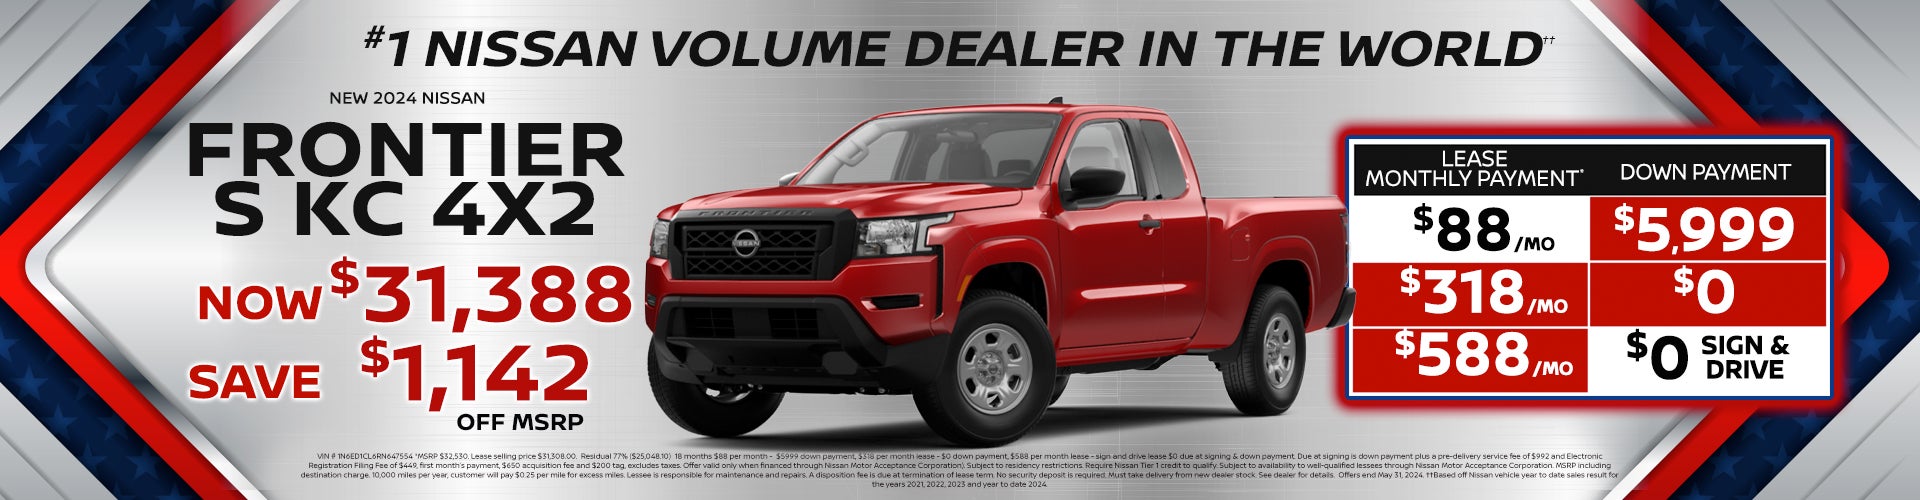 2023 Nissan Frontier starting at $88 per month